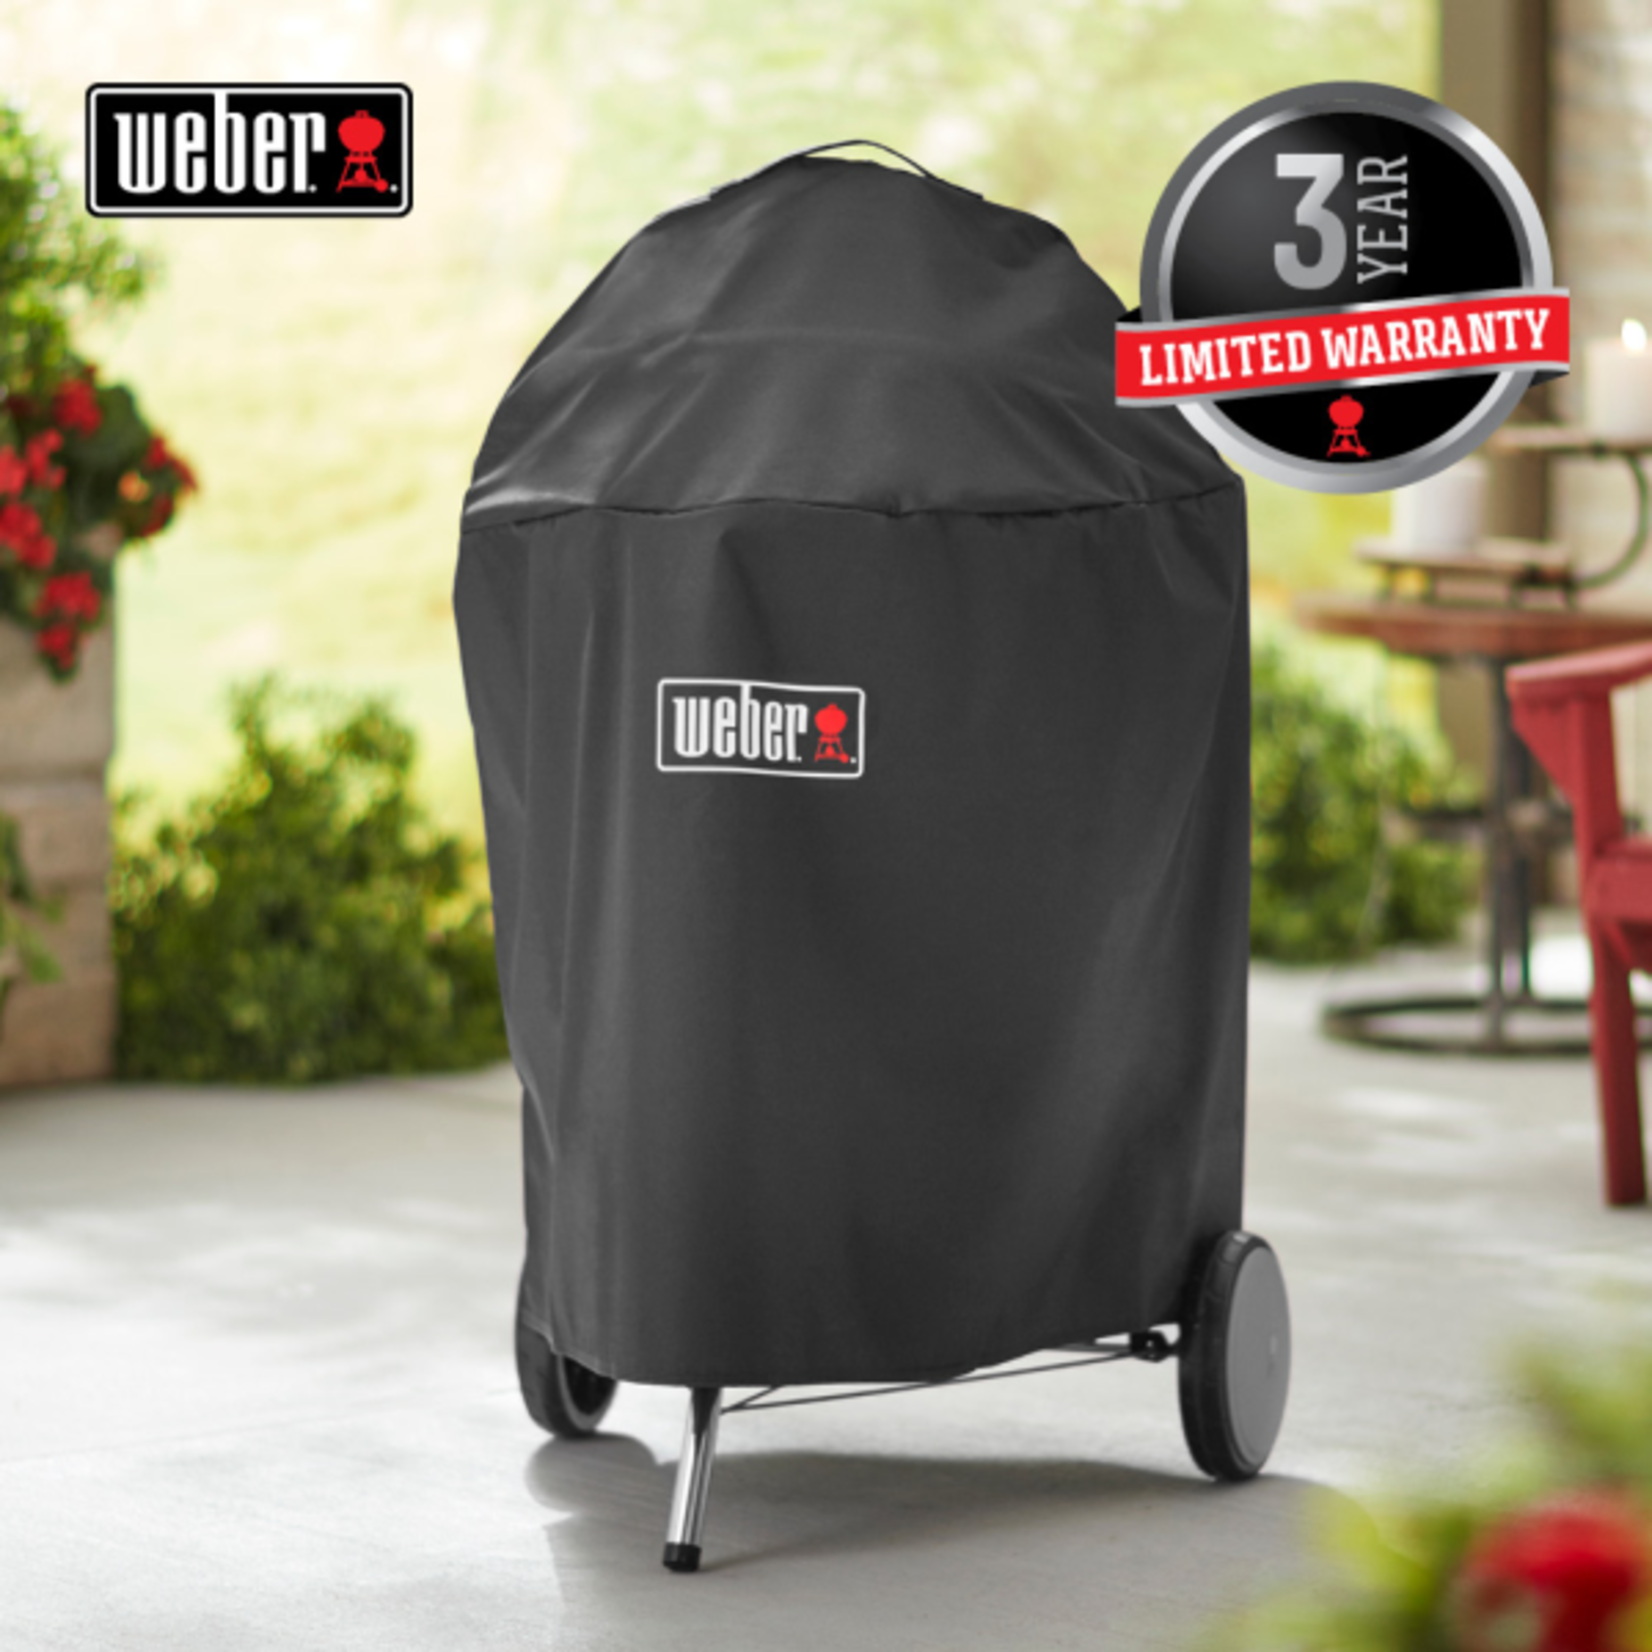 Weber Premium Grill Cover - Fits 22" charcoal grills